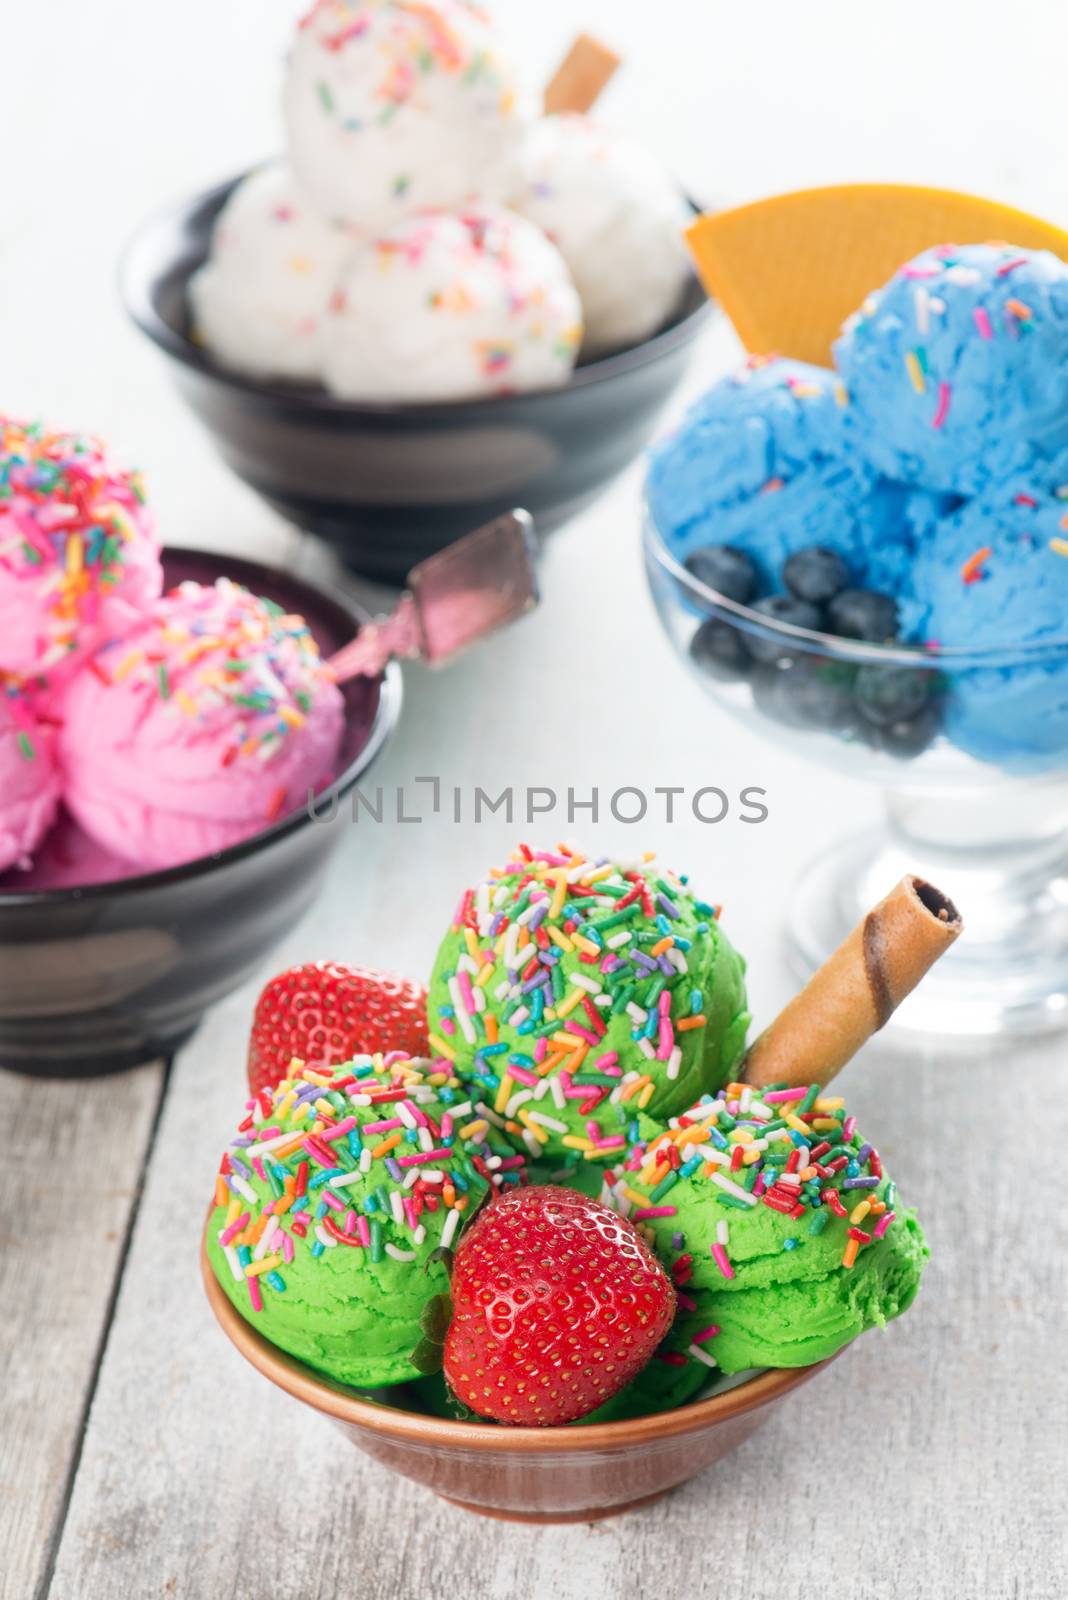 Various flavor ice cream in bowl on wooden background.